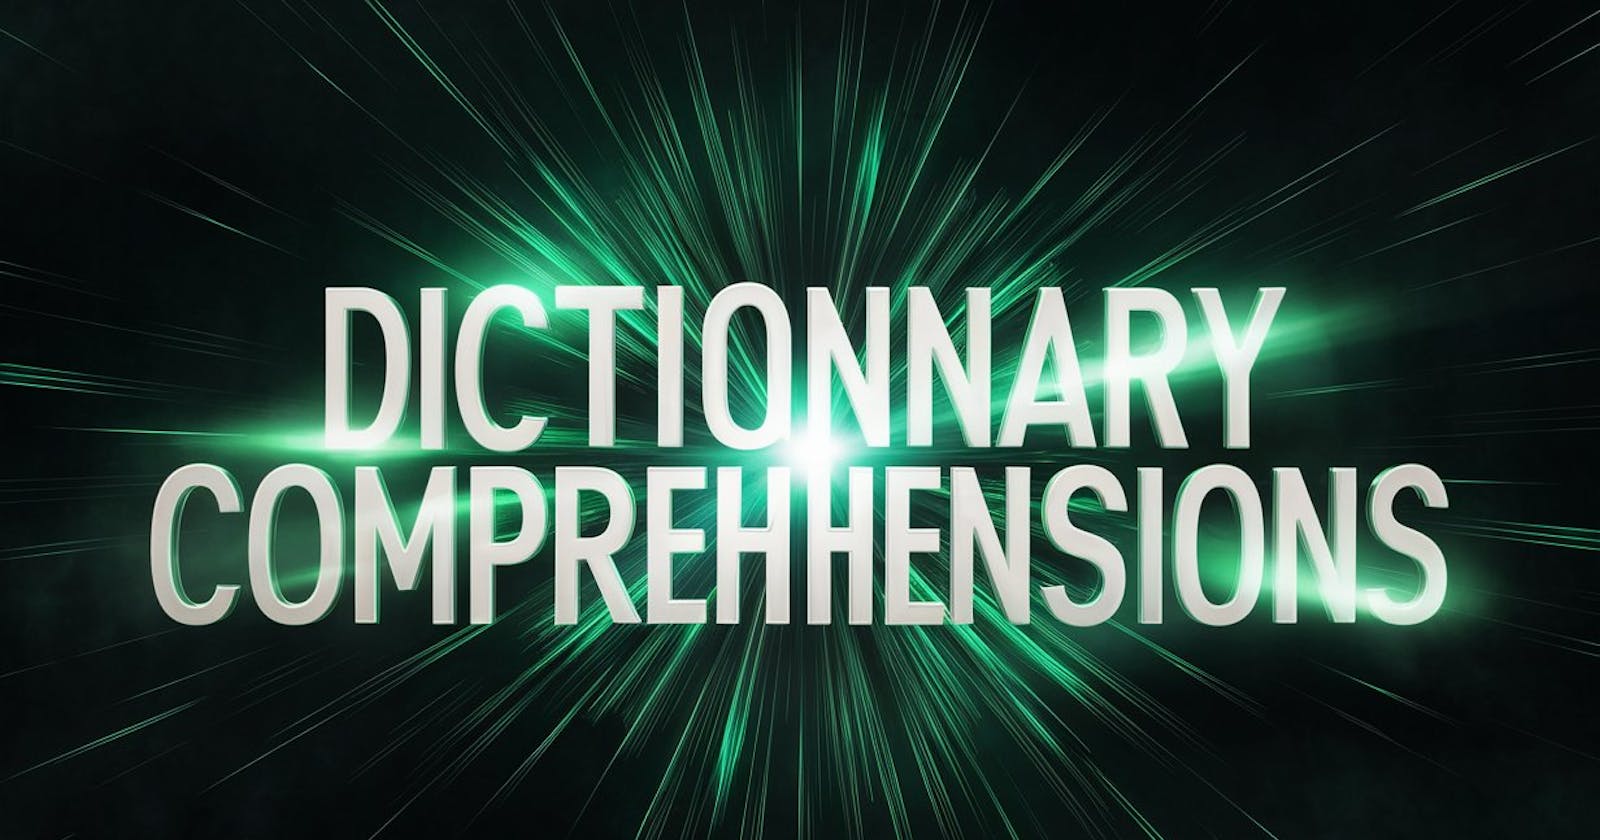 How to Use Dictionary Comprehensions: Learn with 5 Examples